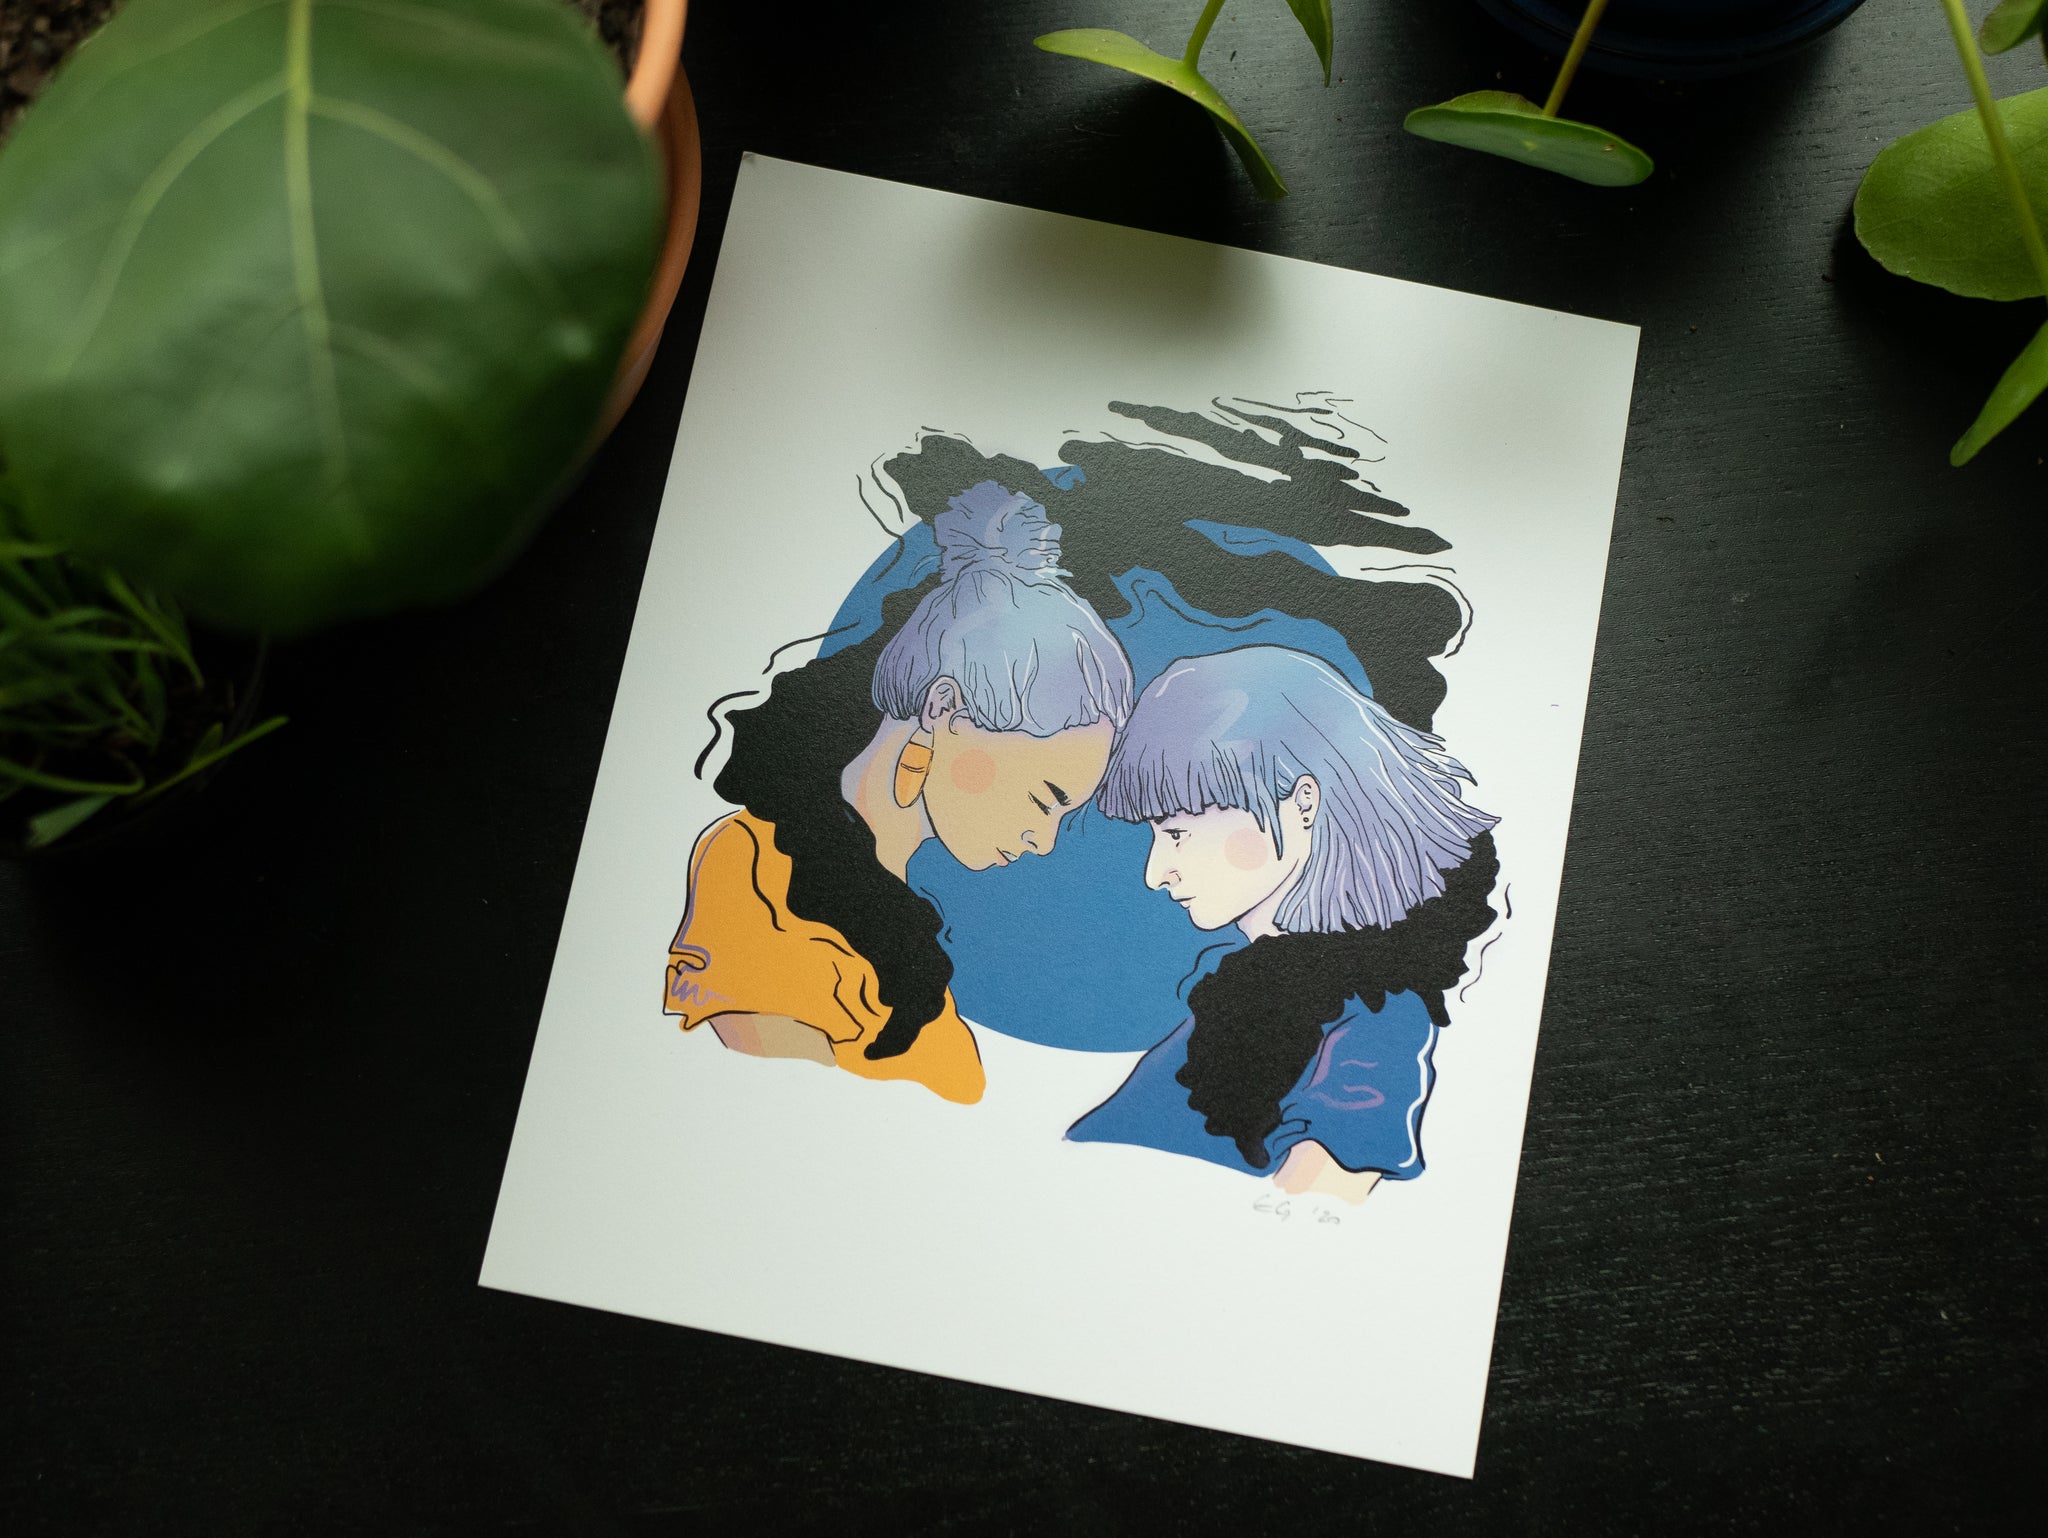 "Let's Take Care of Eachother" Print